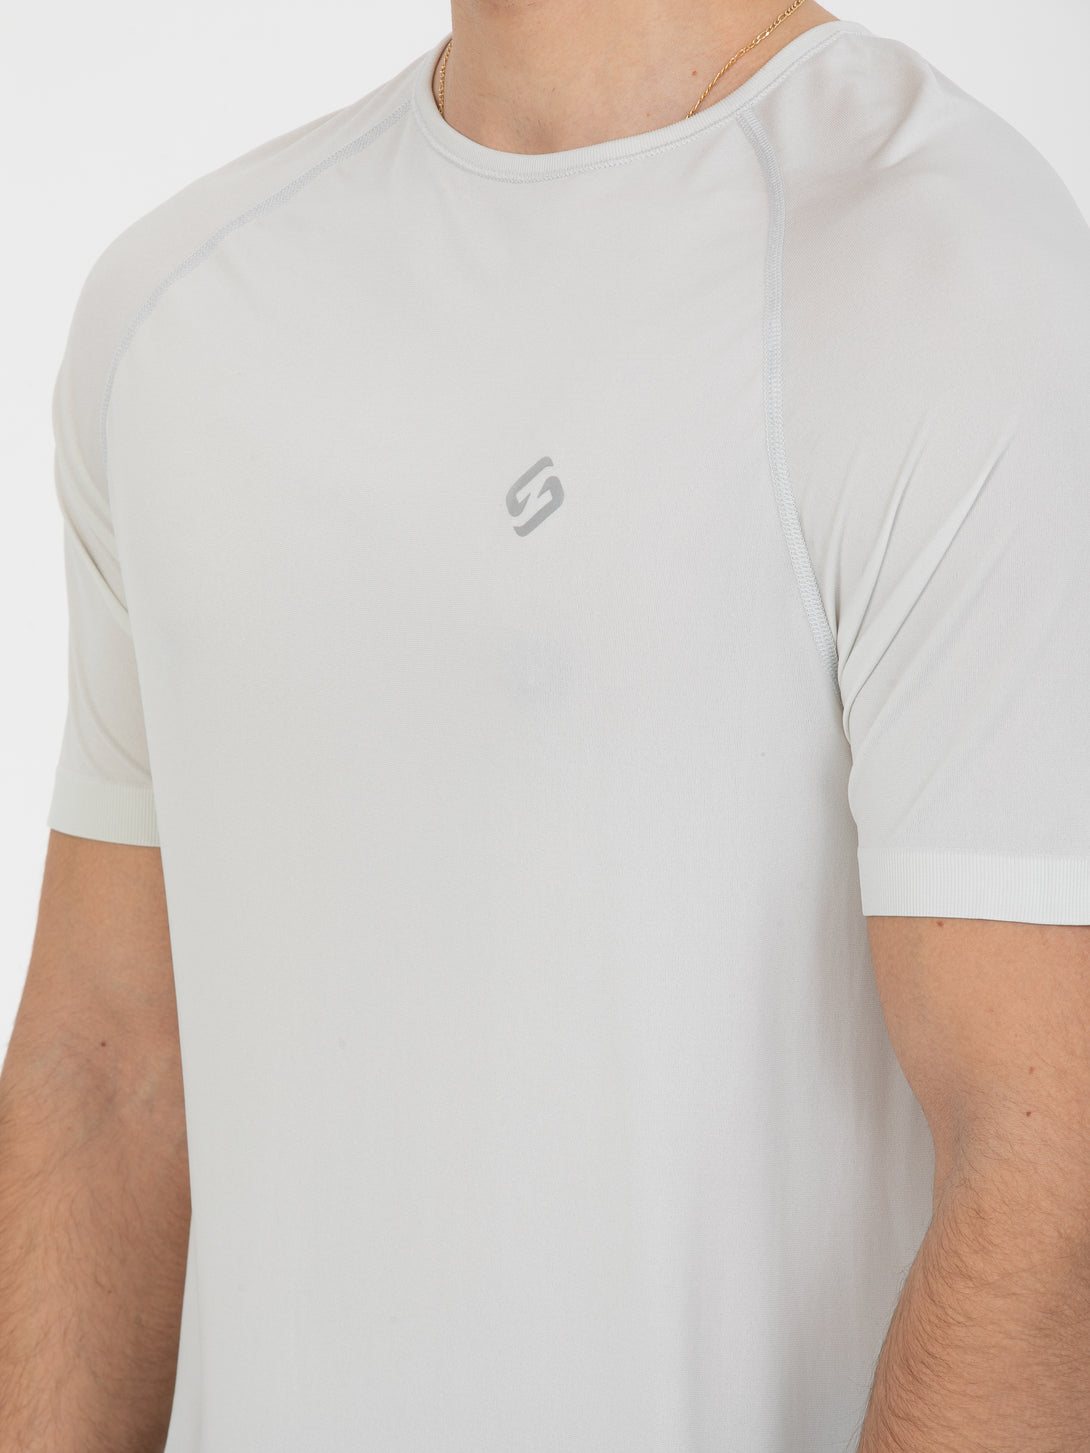 A Man Wearing Light Grey Color Seamless The Motion T-Shirt